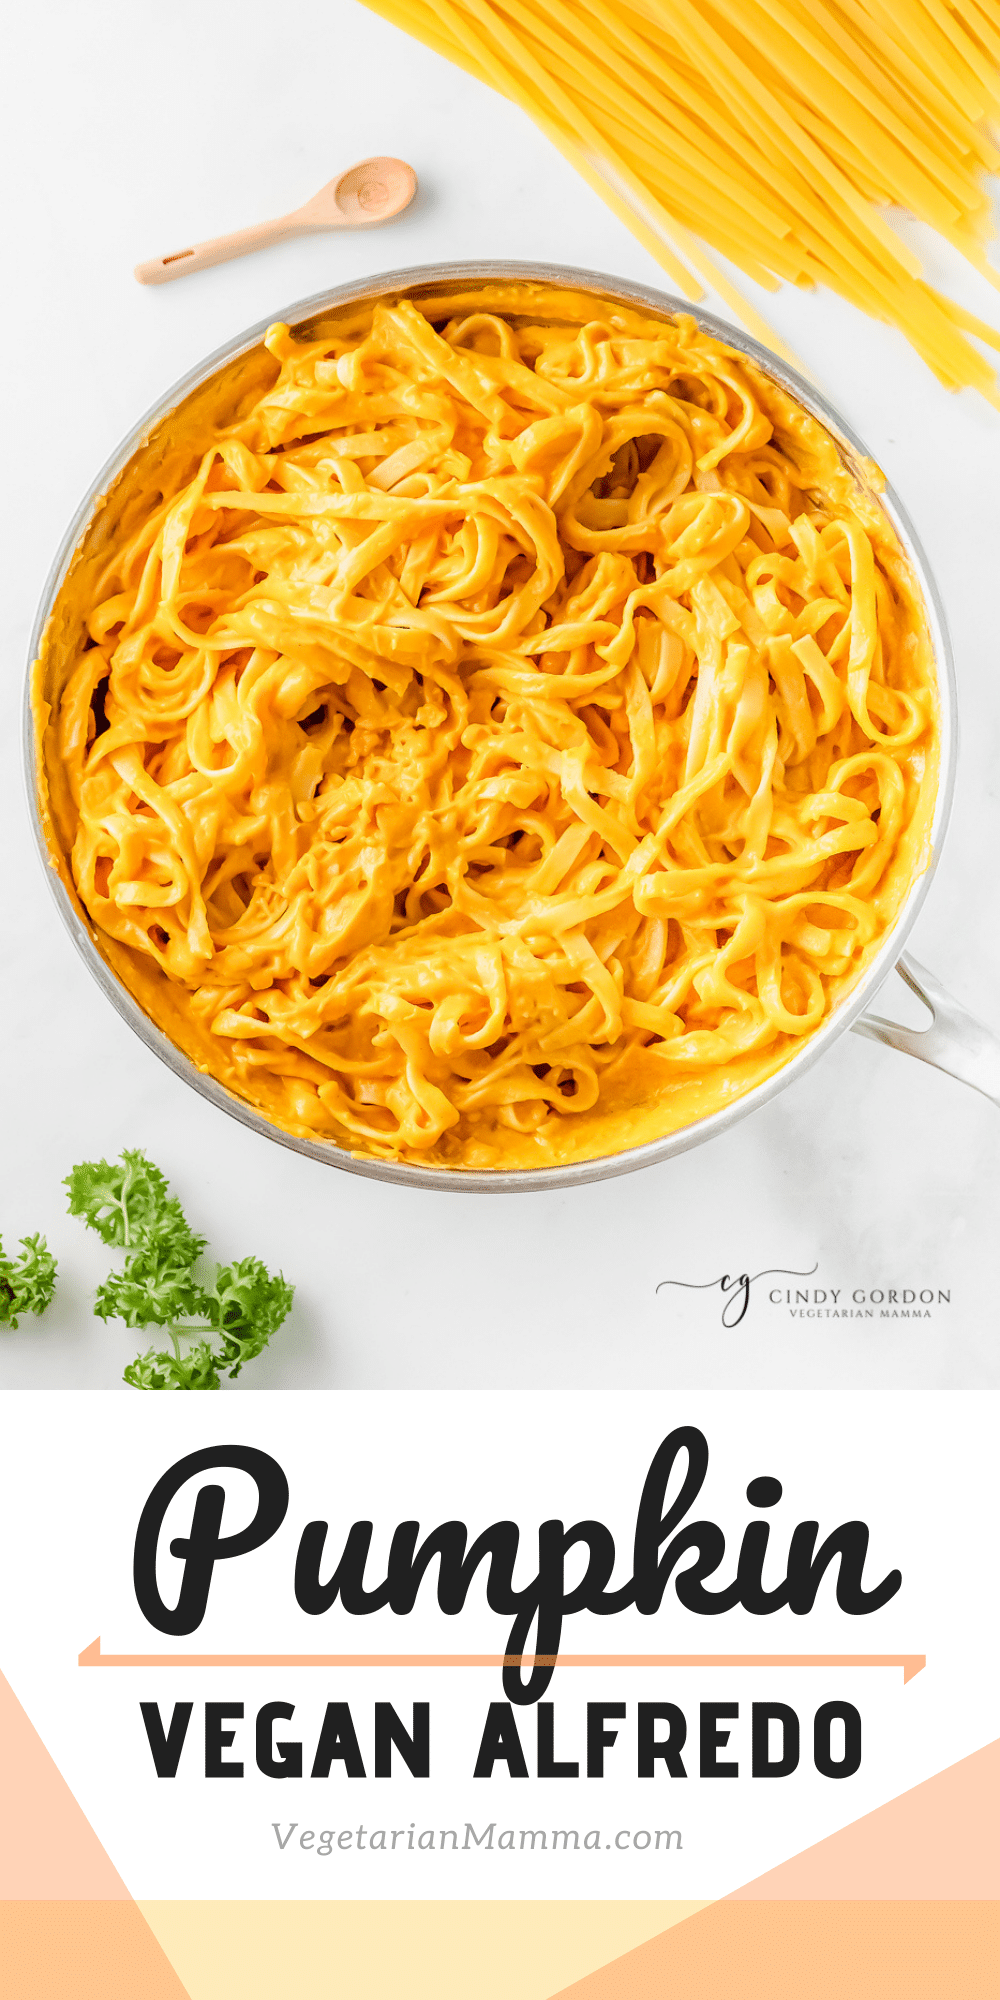 Vegan Pumpkin Alfredo is a pumpkin pasta dish that's rich, savory, and perfect for fall. Pumpkin puree, vegan cheese subs and delicious Italian flavors come together to create a creamy, delightful meal for your family. #veganpumpkinalfredo #pumpkinpasta